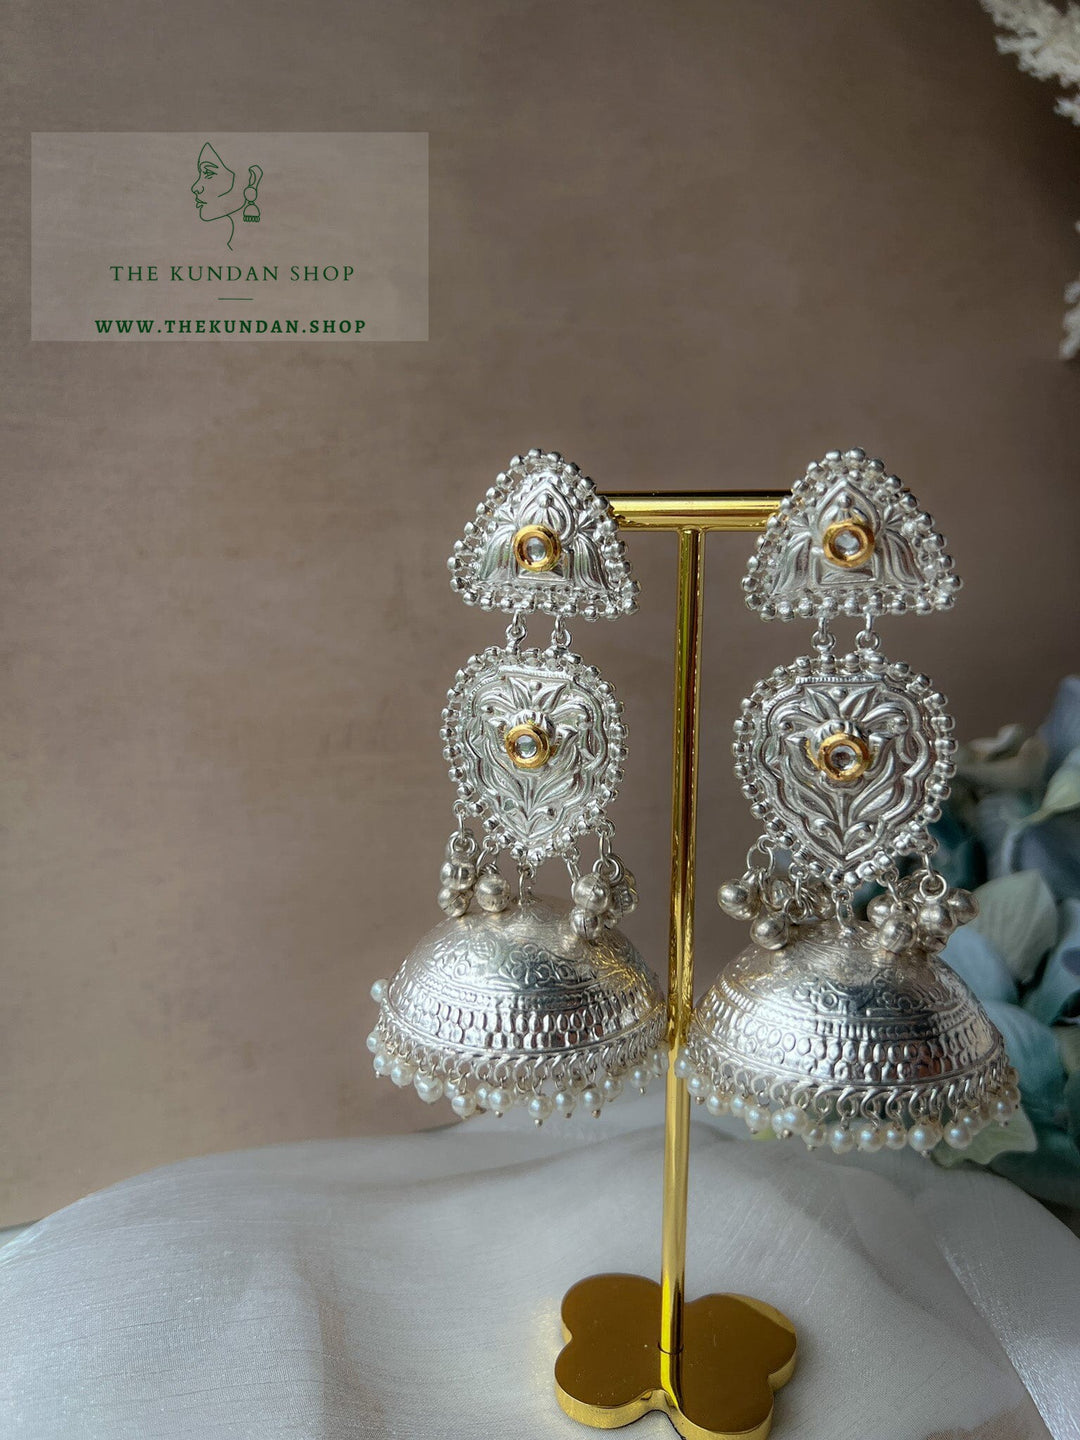 Supported in Oxidized Silver Earrings THE KUNDAN SHOP 